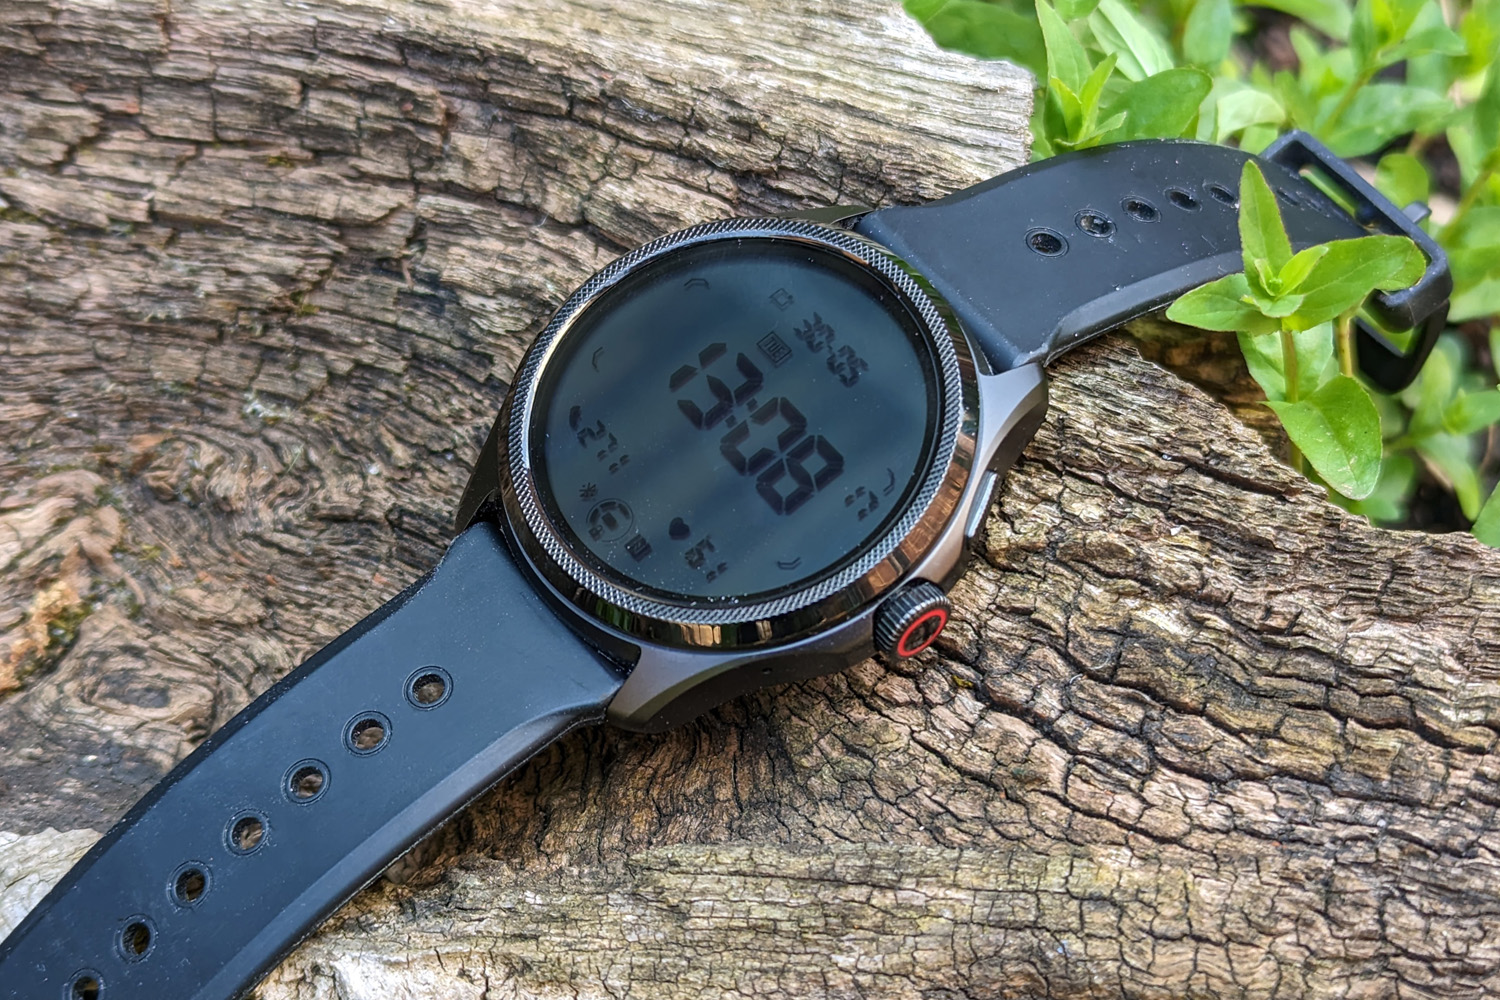 Long-Term Review Of The Mobvoi TicWatch Pro 3 Ultra